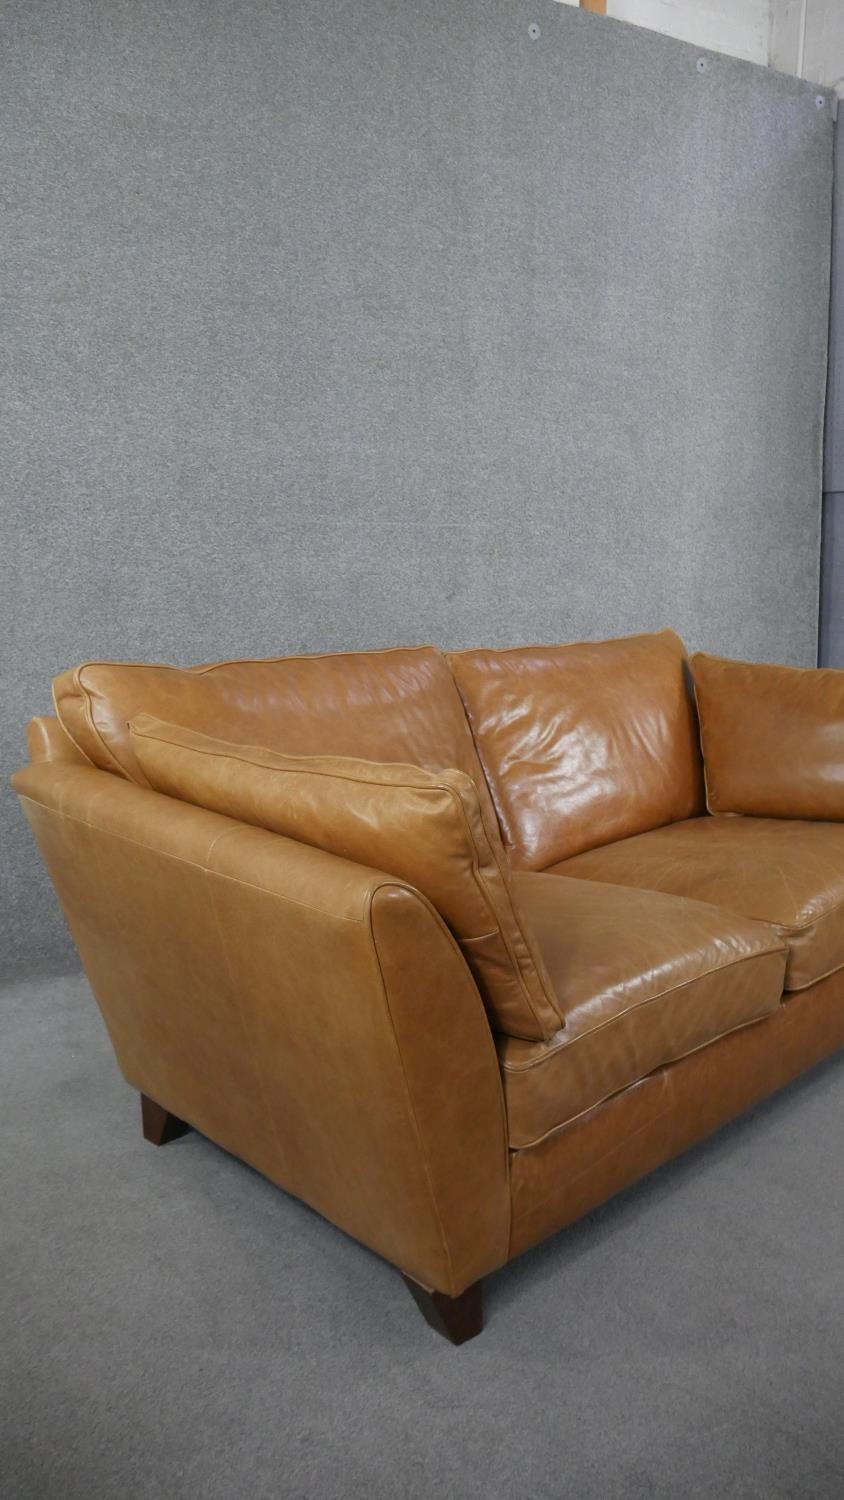 An Art Deco style two seater sofa in light tan leather upholstery. H.84 W.179 D.97cm - Image 4 of 5